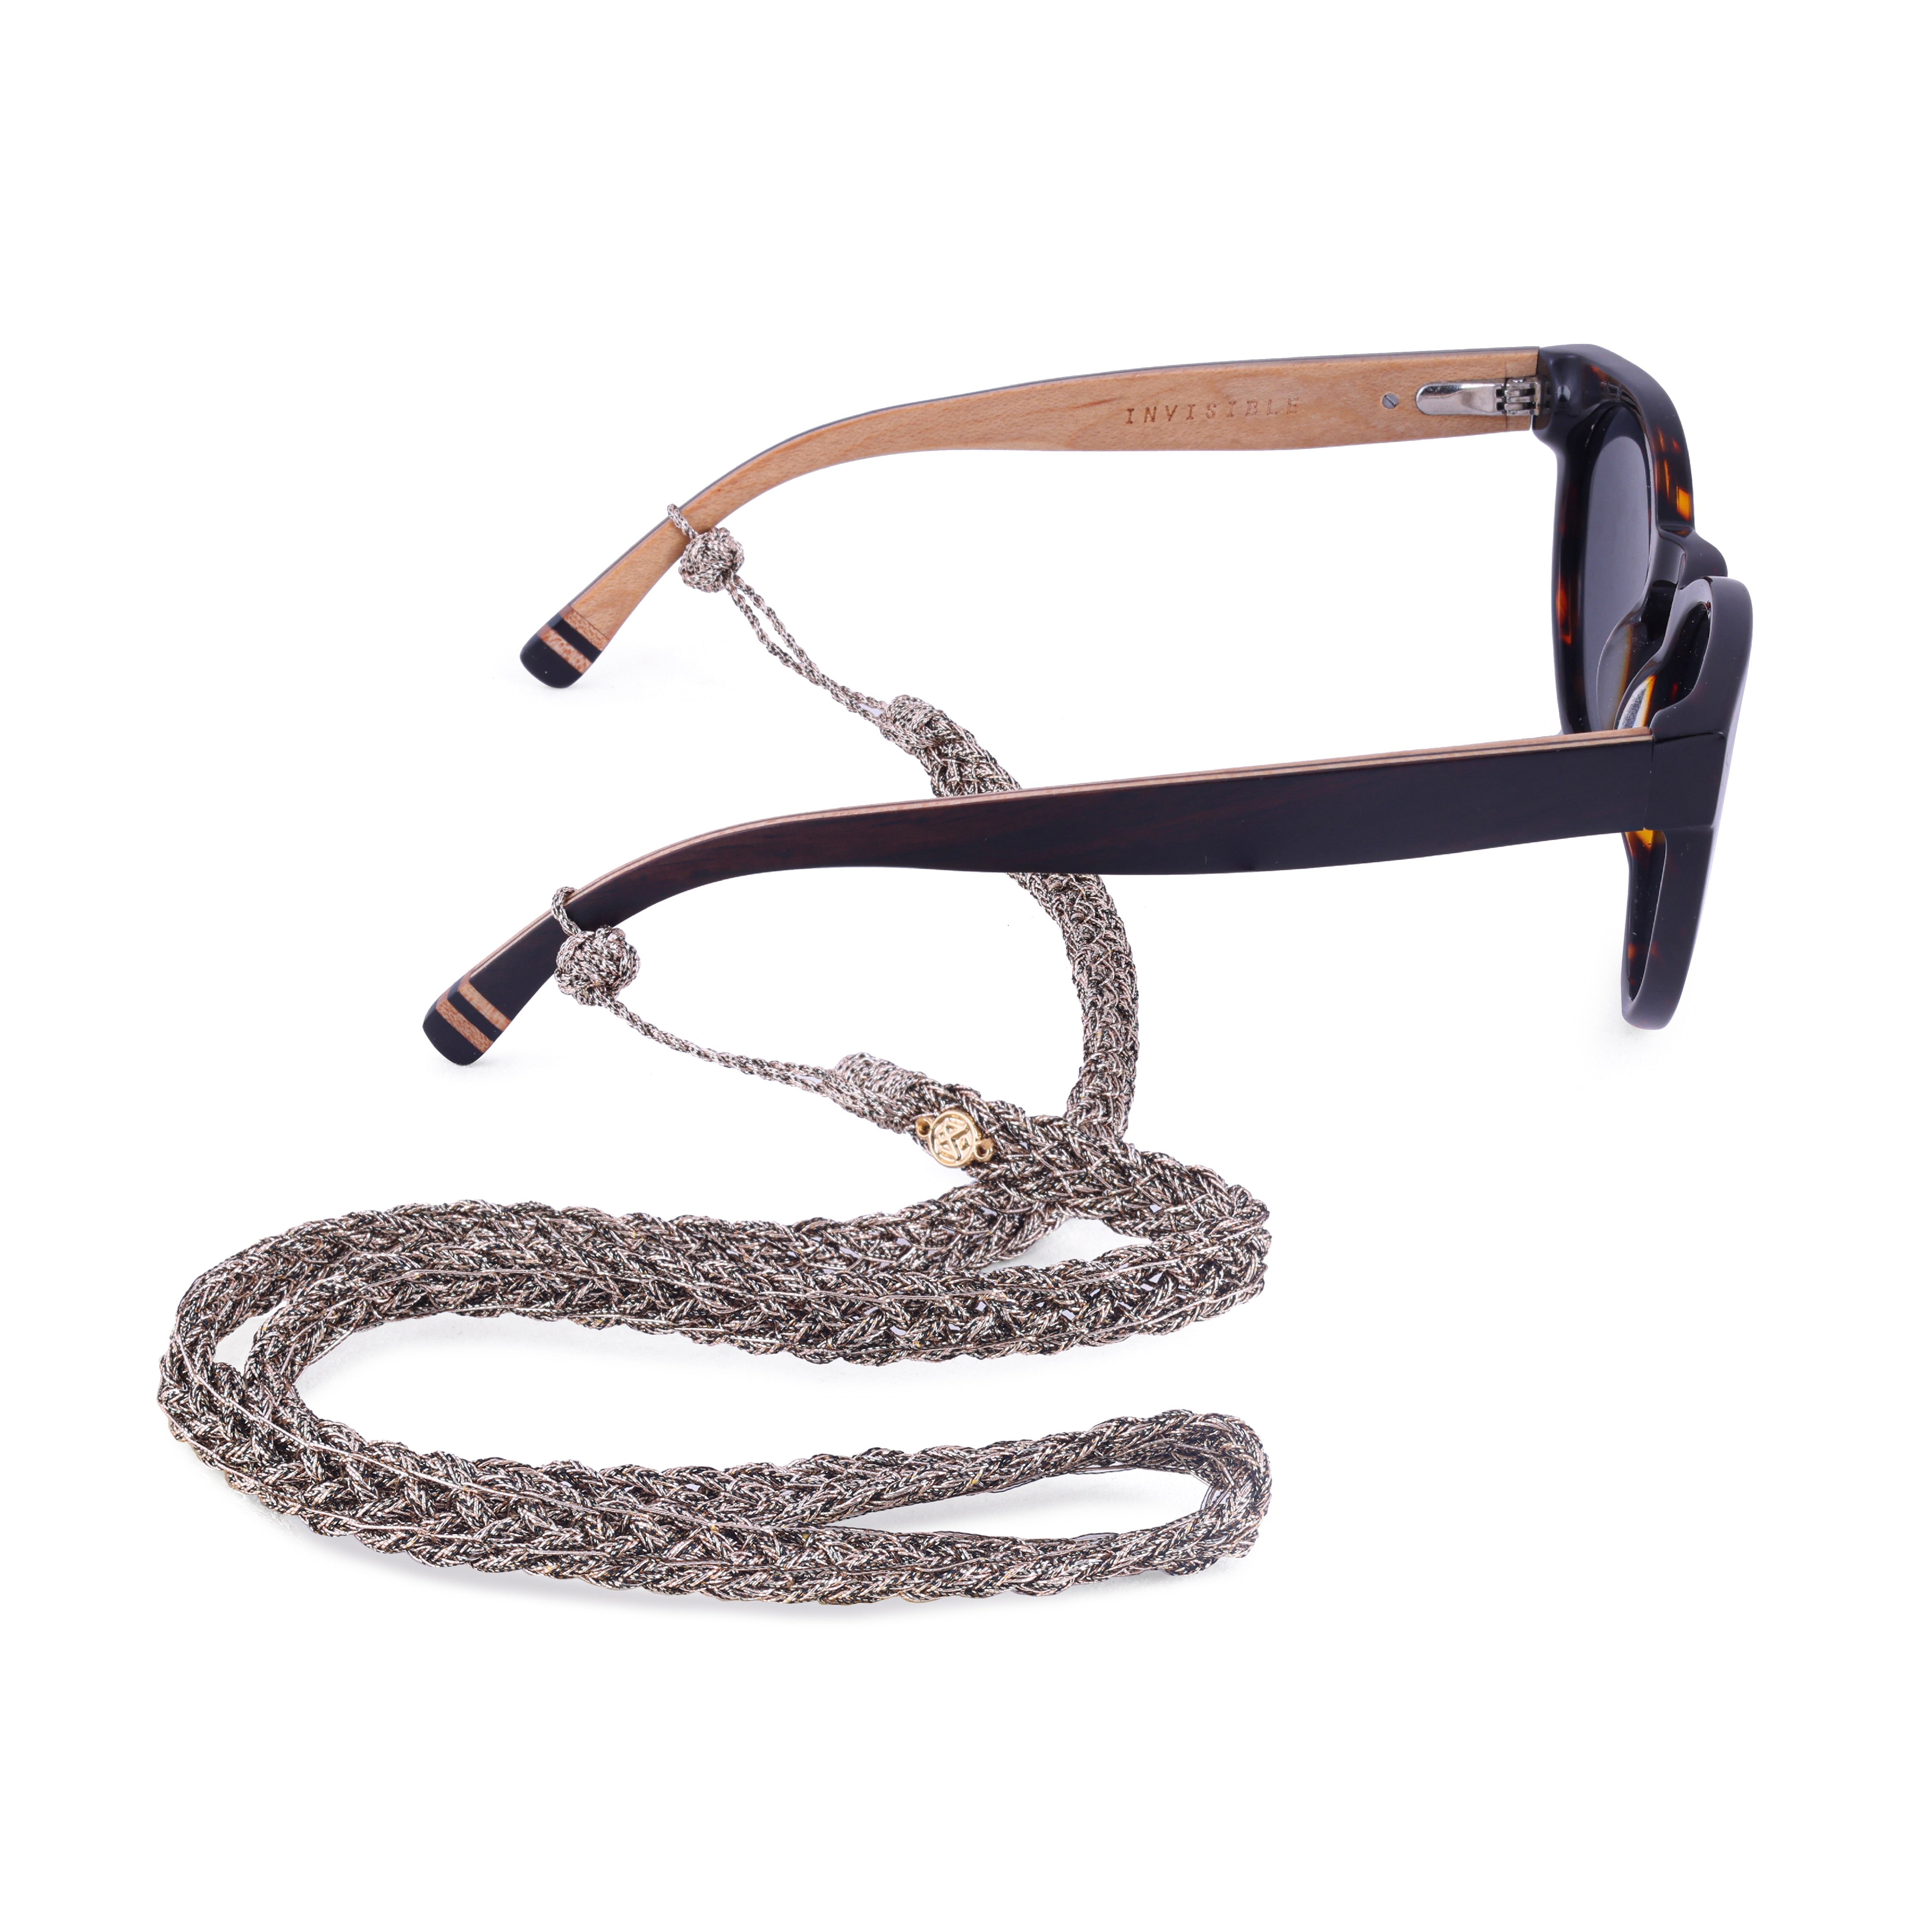 Maxi Braided Glasses Strap in Greige